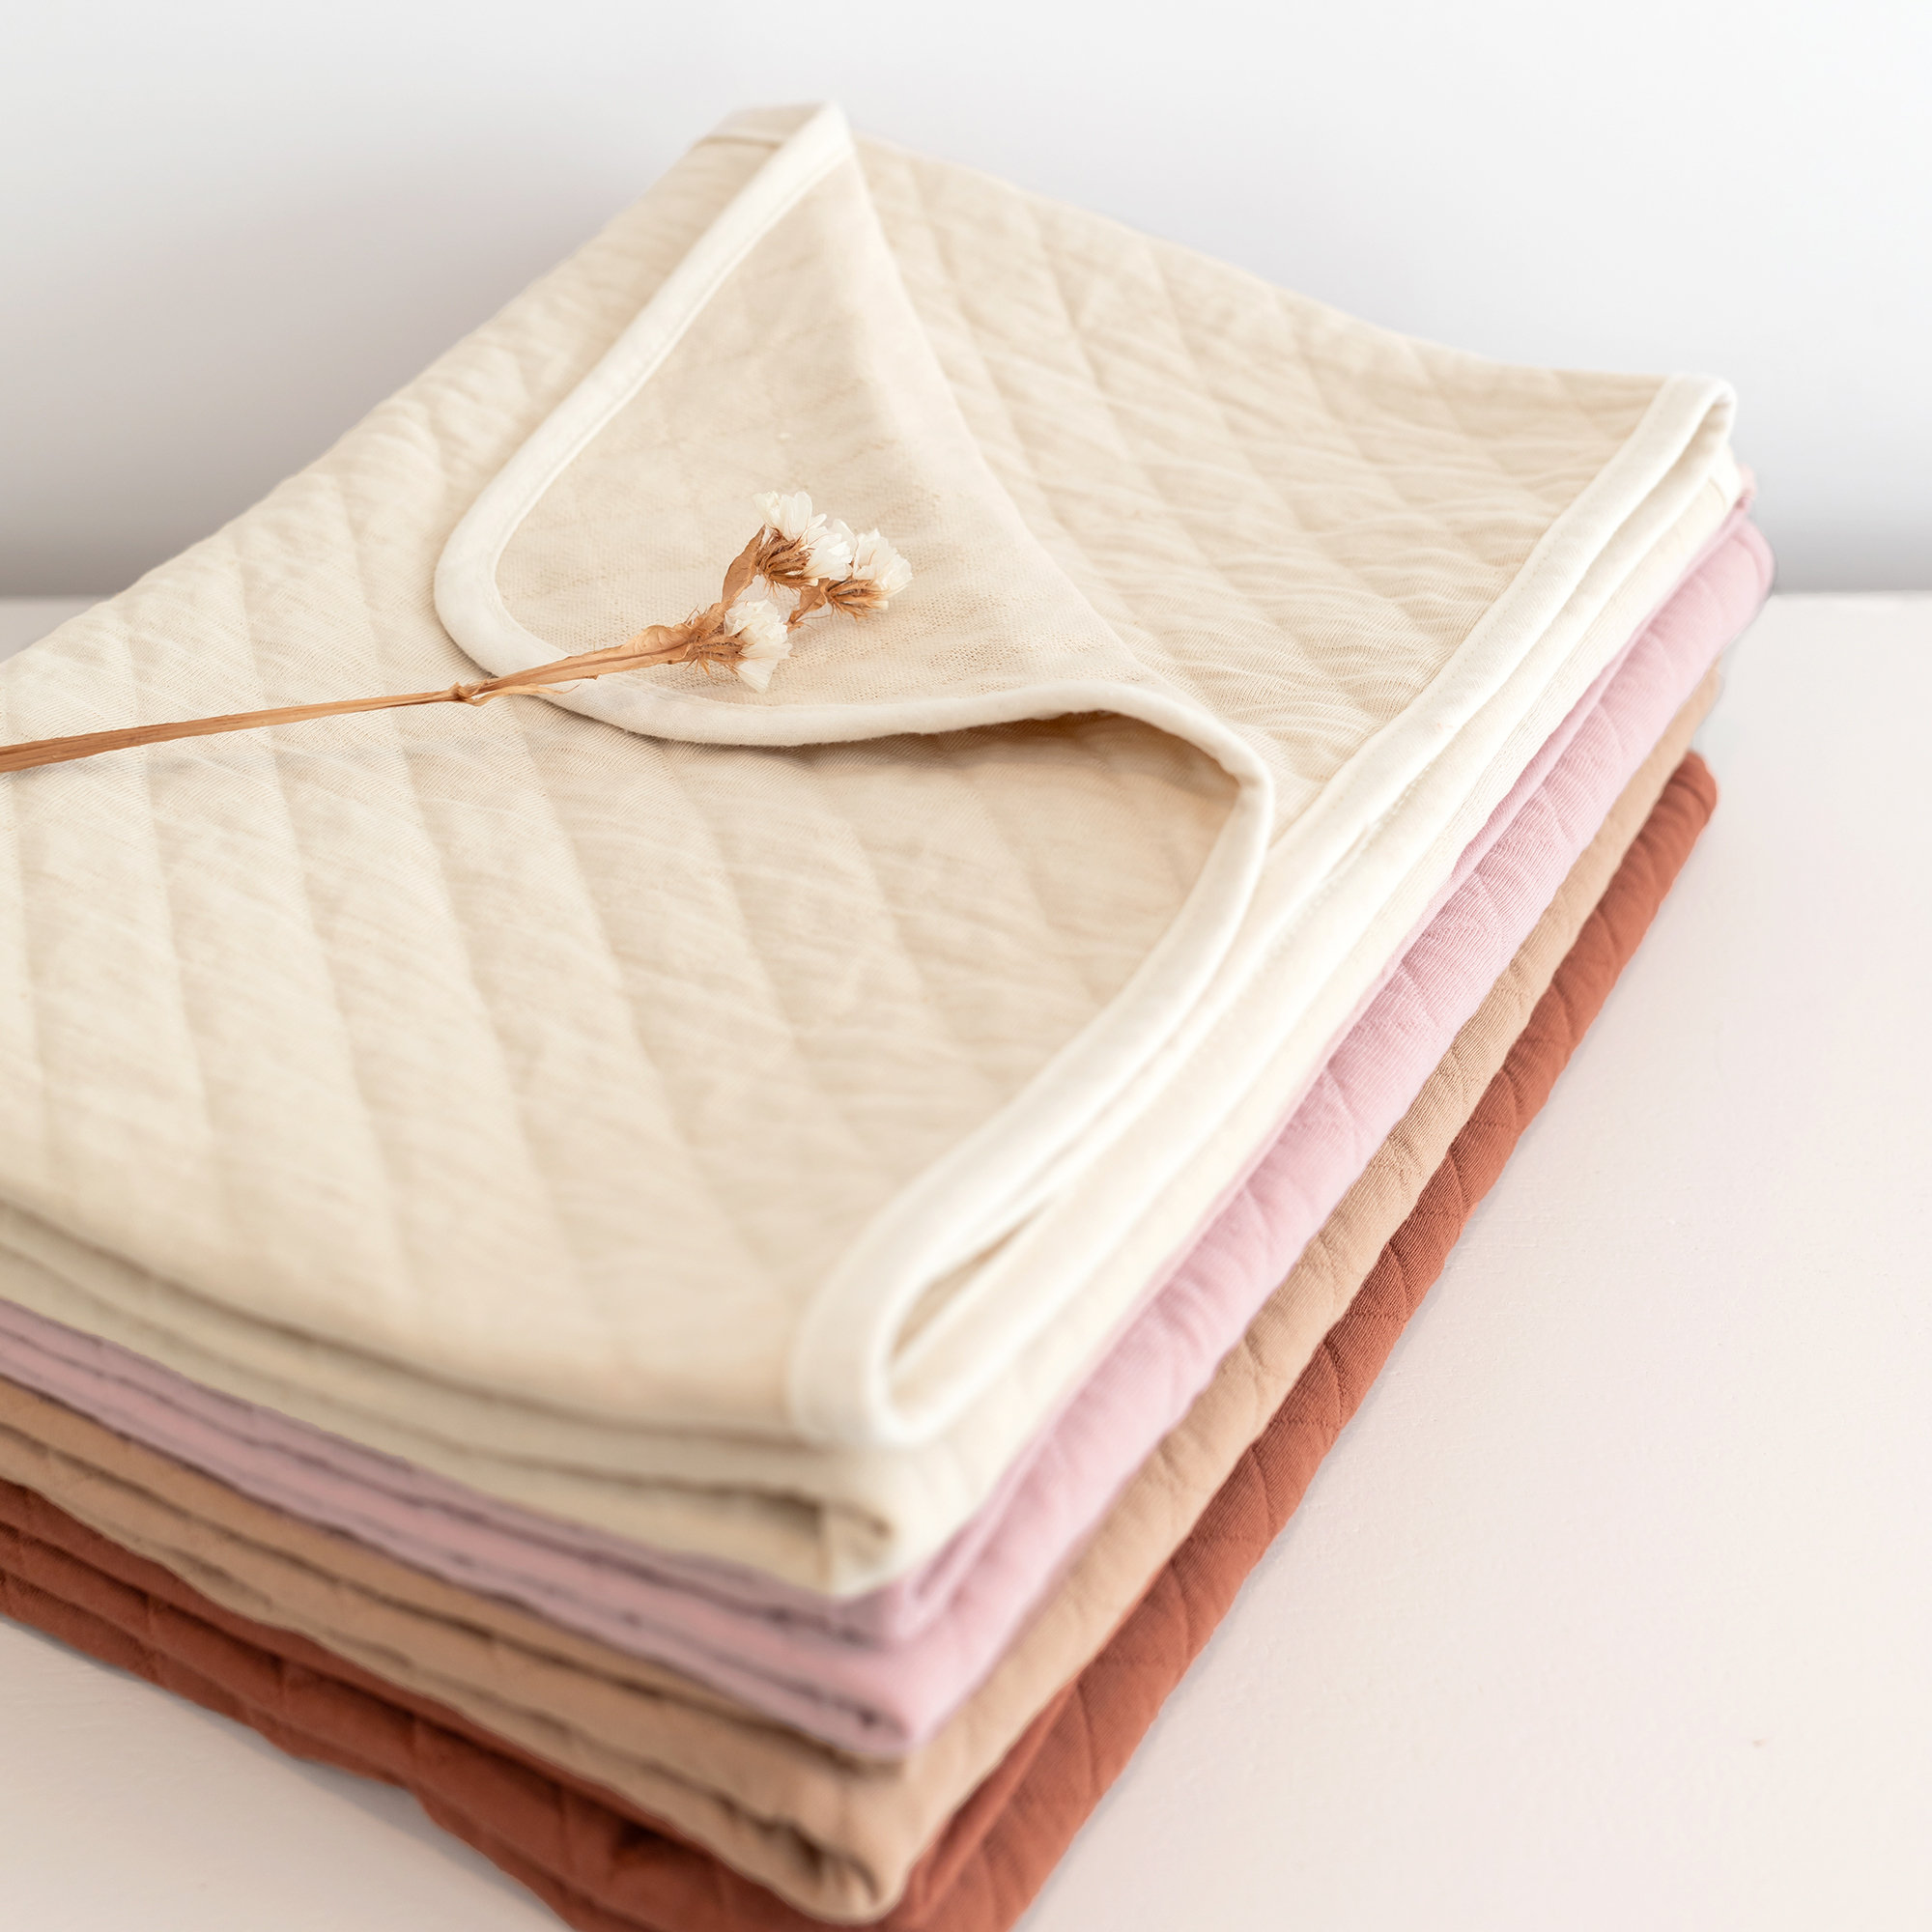 Blanket Pady quilted jersey 75x100cm QUILT Cream tog 1.5[WANDER]